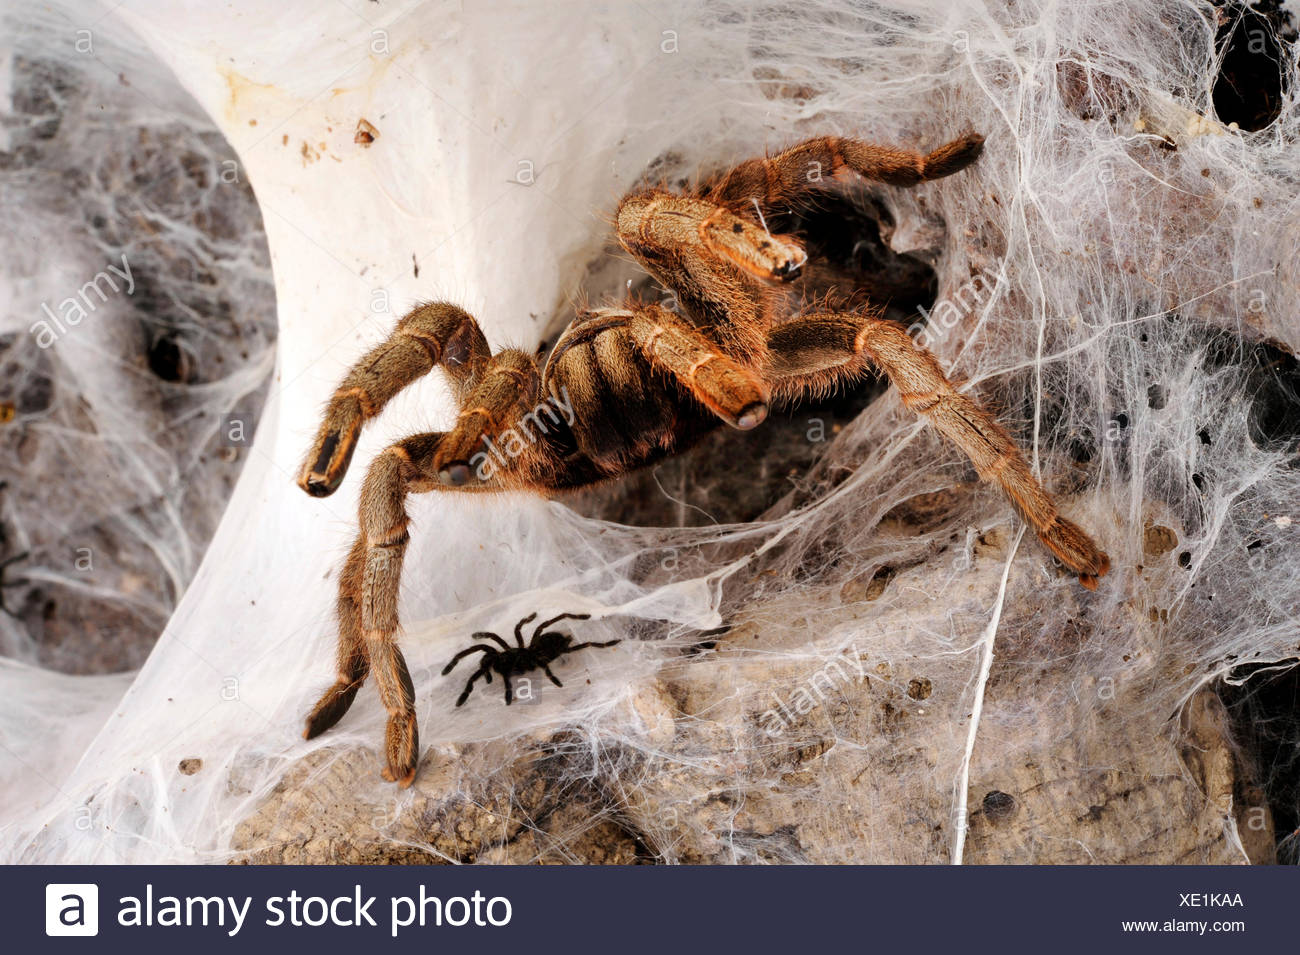 African Baboon Spider High Resolution Stock Photography and Images - Alamy